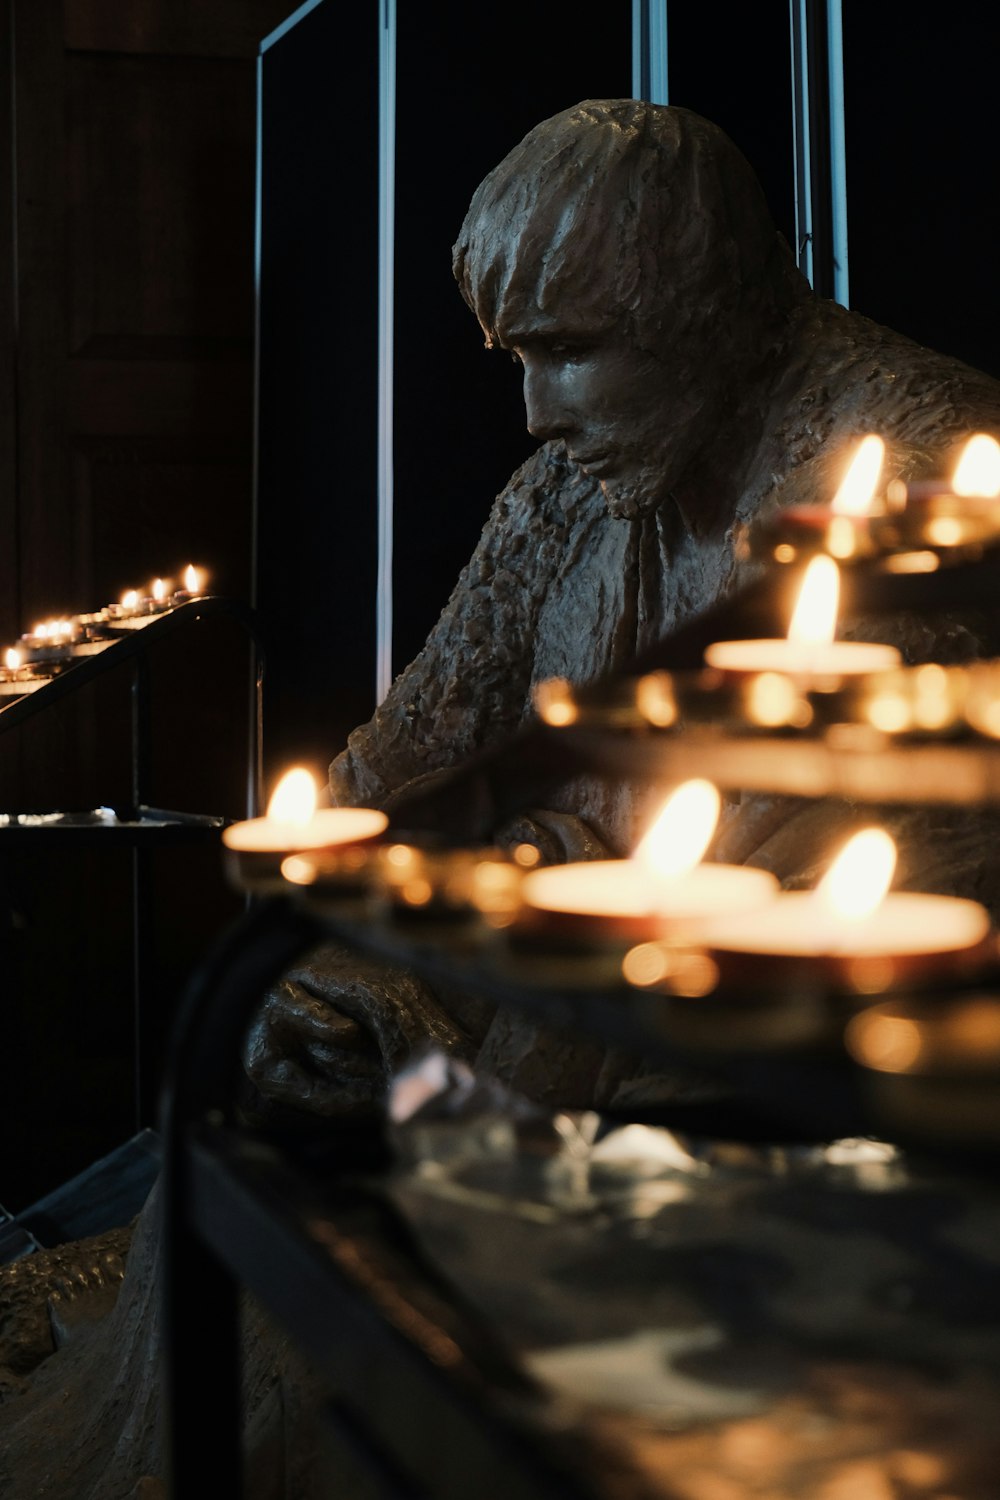 a statue of a person sitting in front of candles